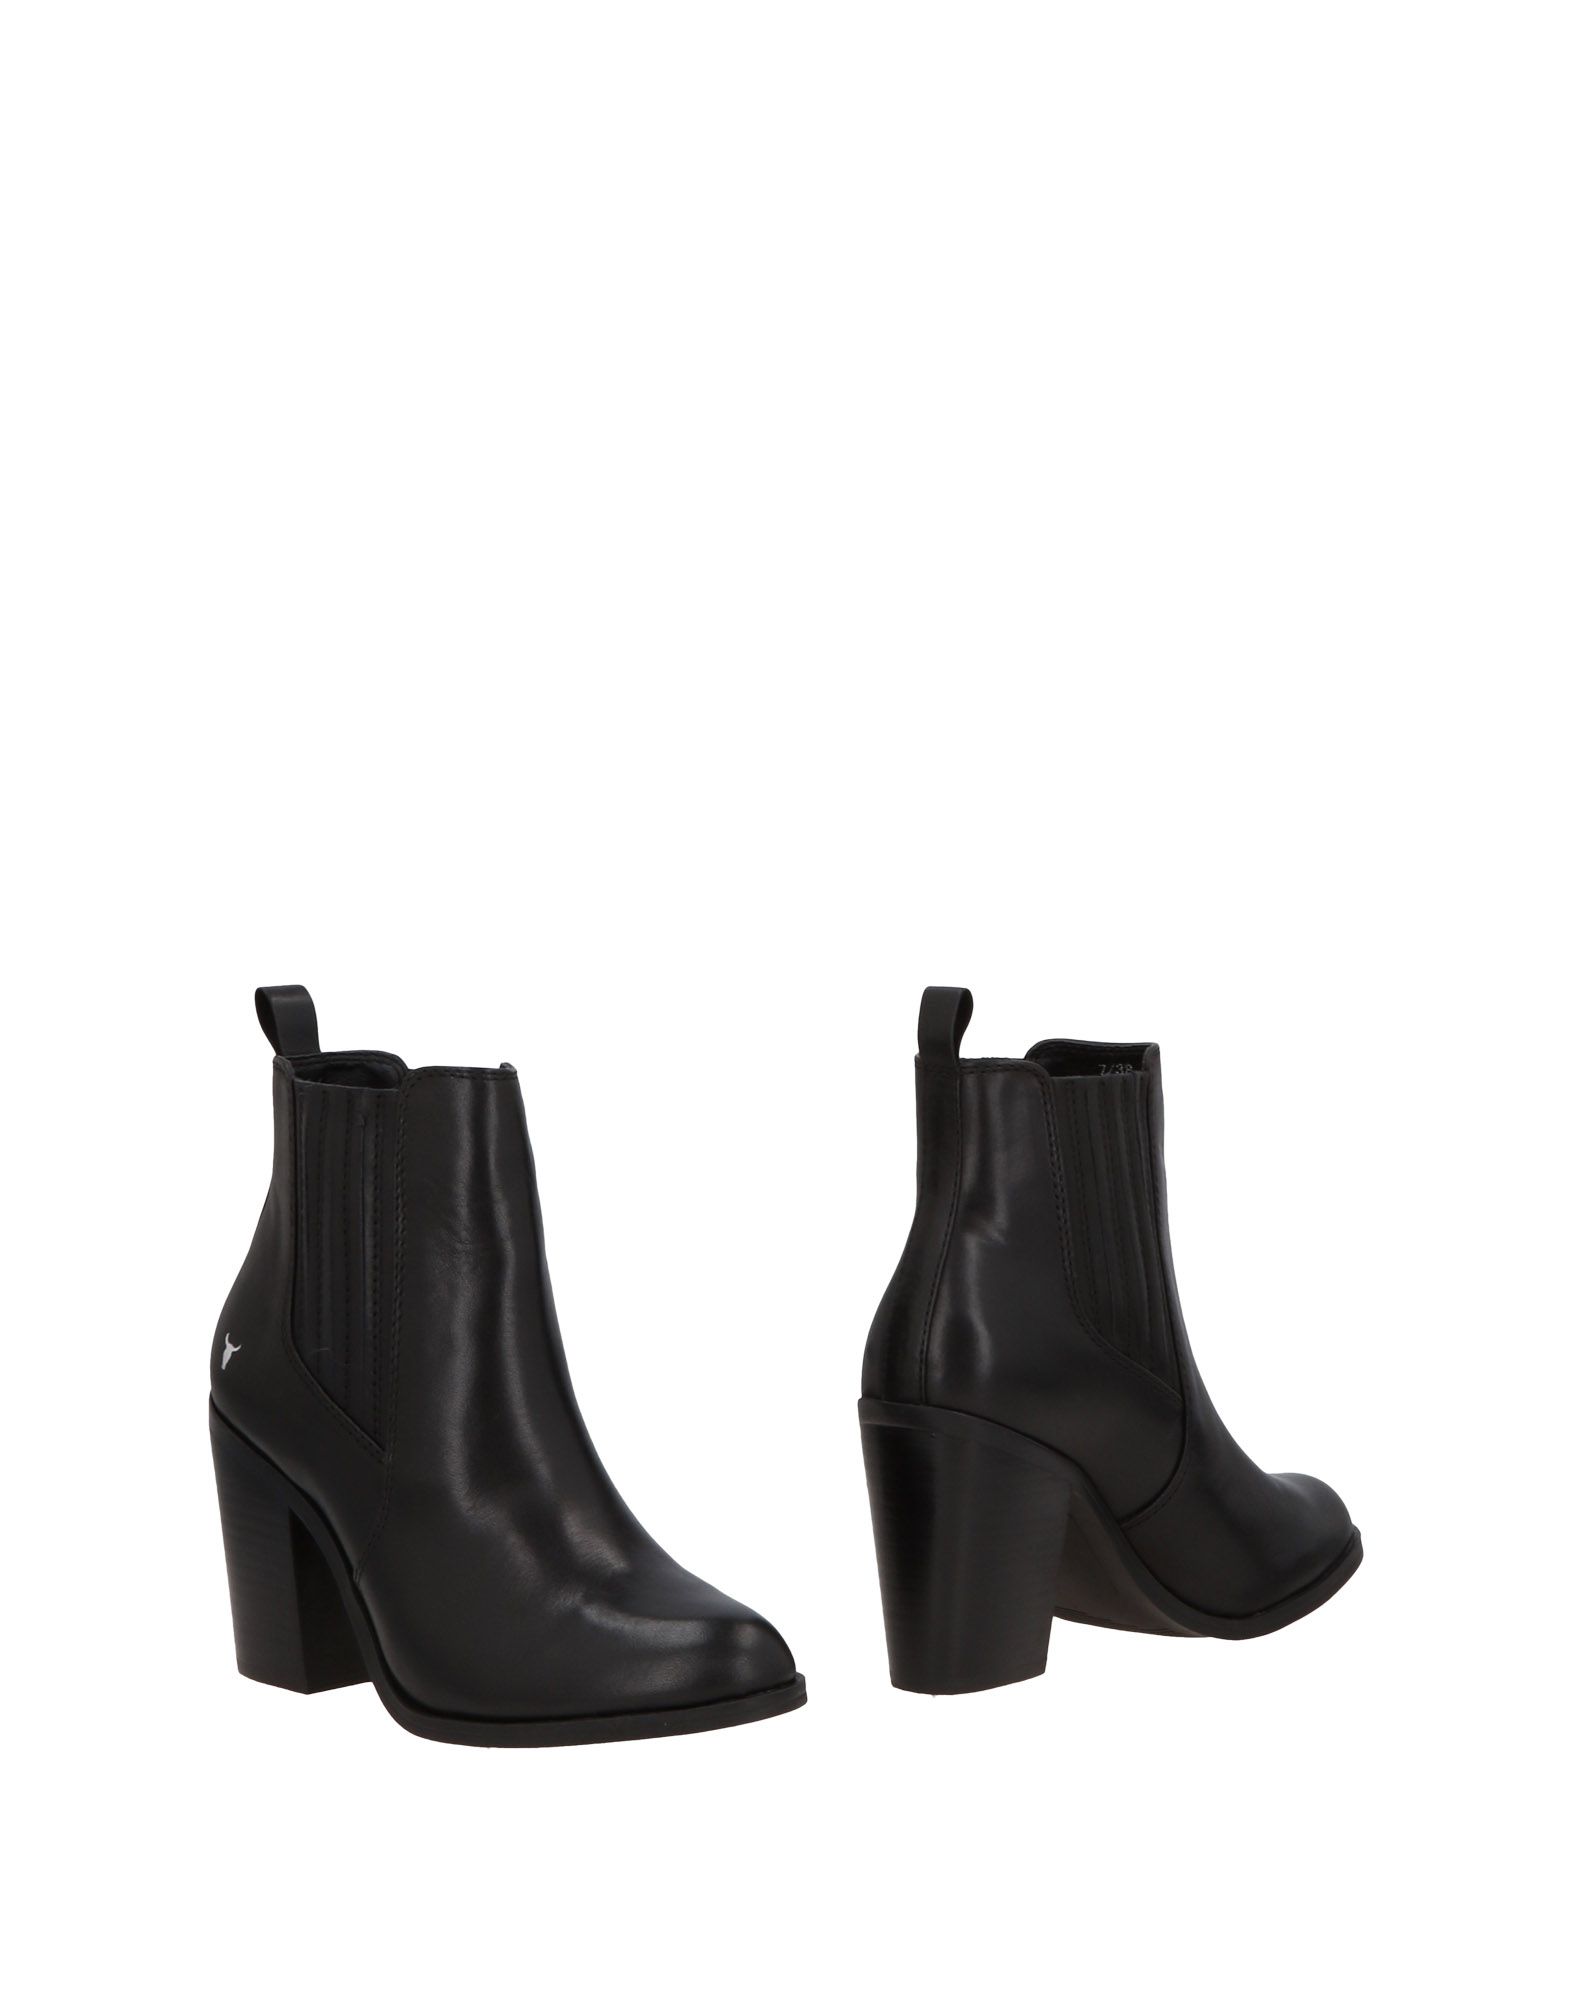 WINDSOR SMITH Ankle boot,11477793AD 13